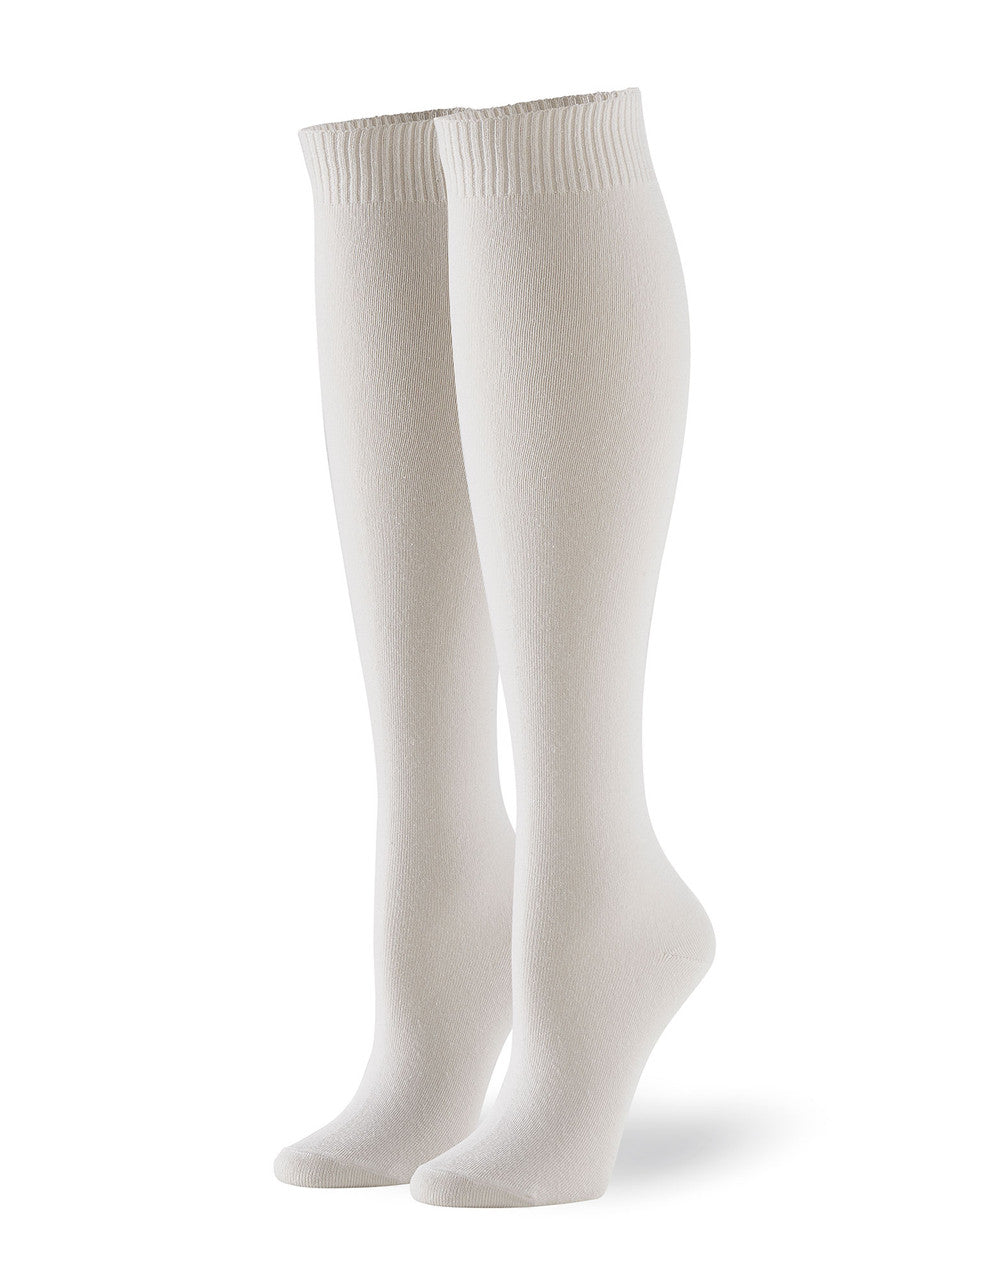 Hue Flat Knit Knee Sock 3 Pack White One Size